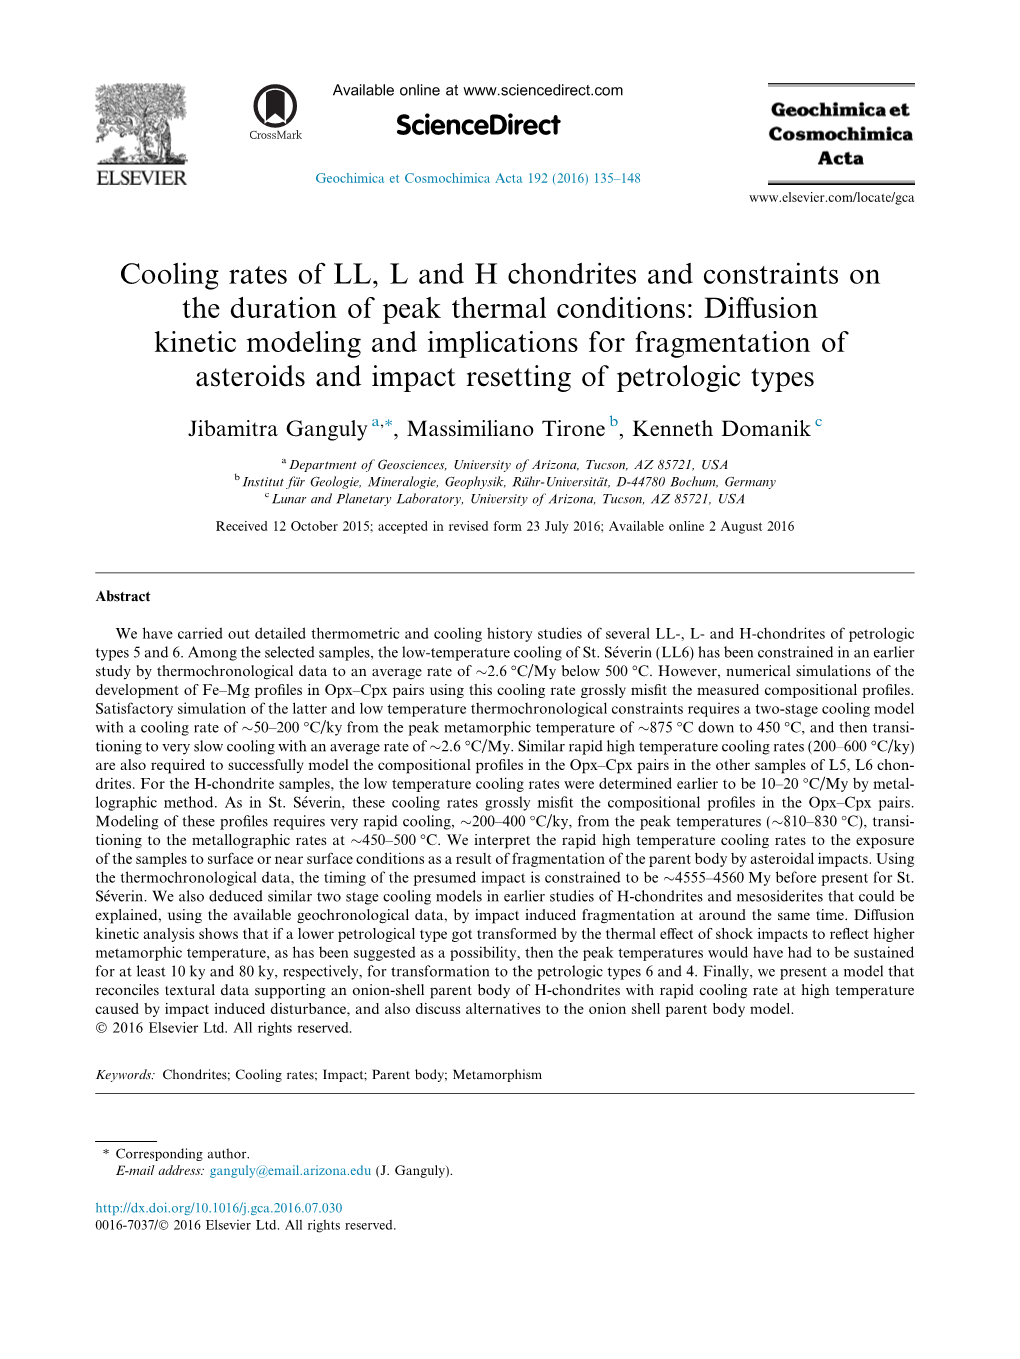 Cooling Rates of LL, L and H Chondrites And